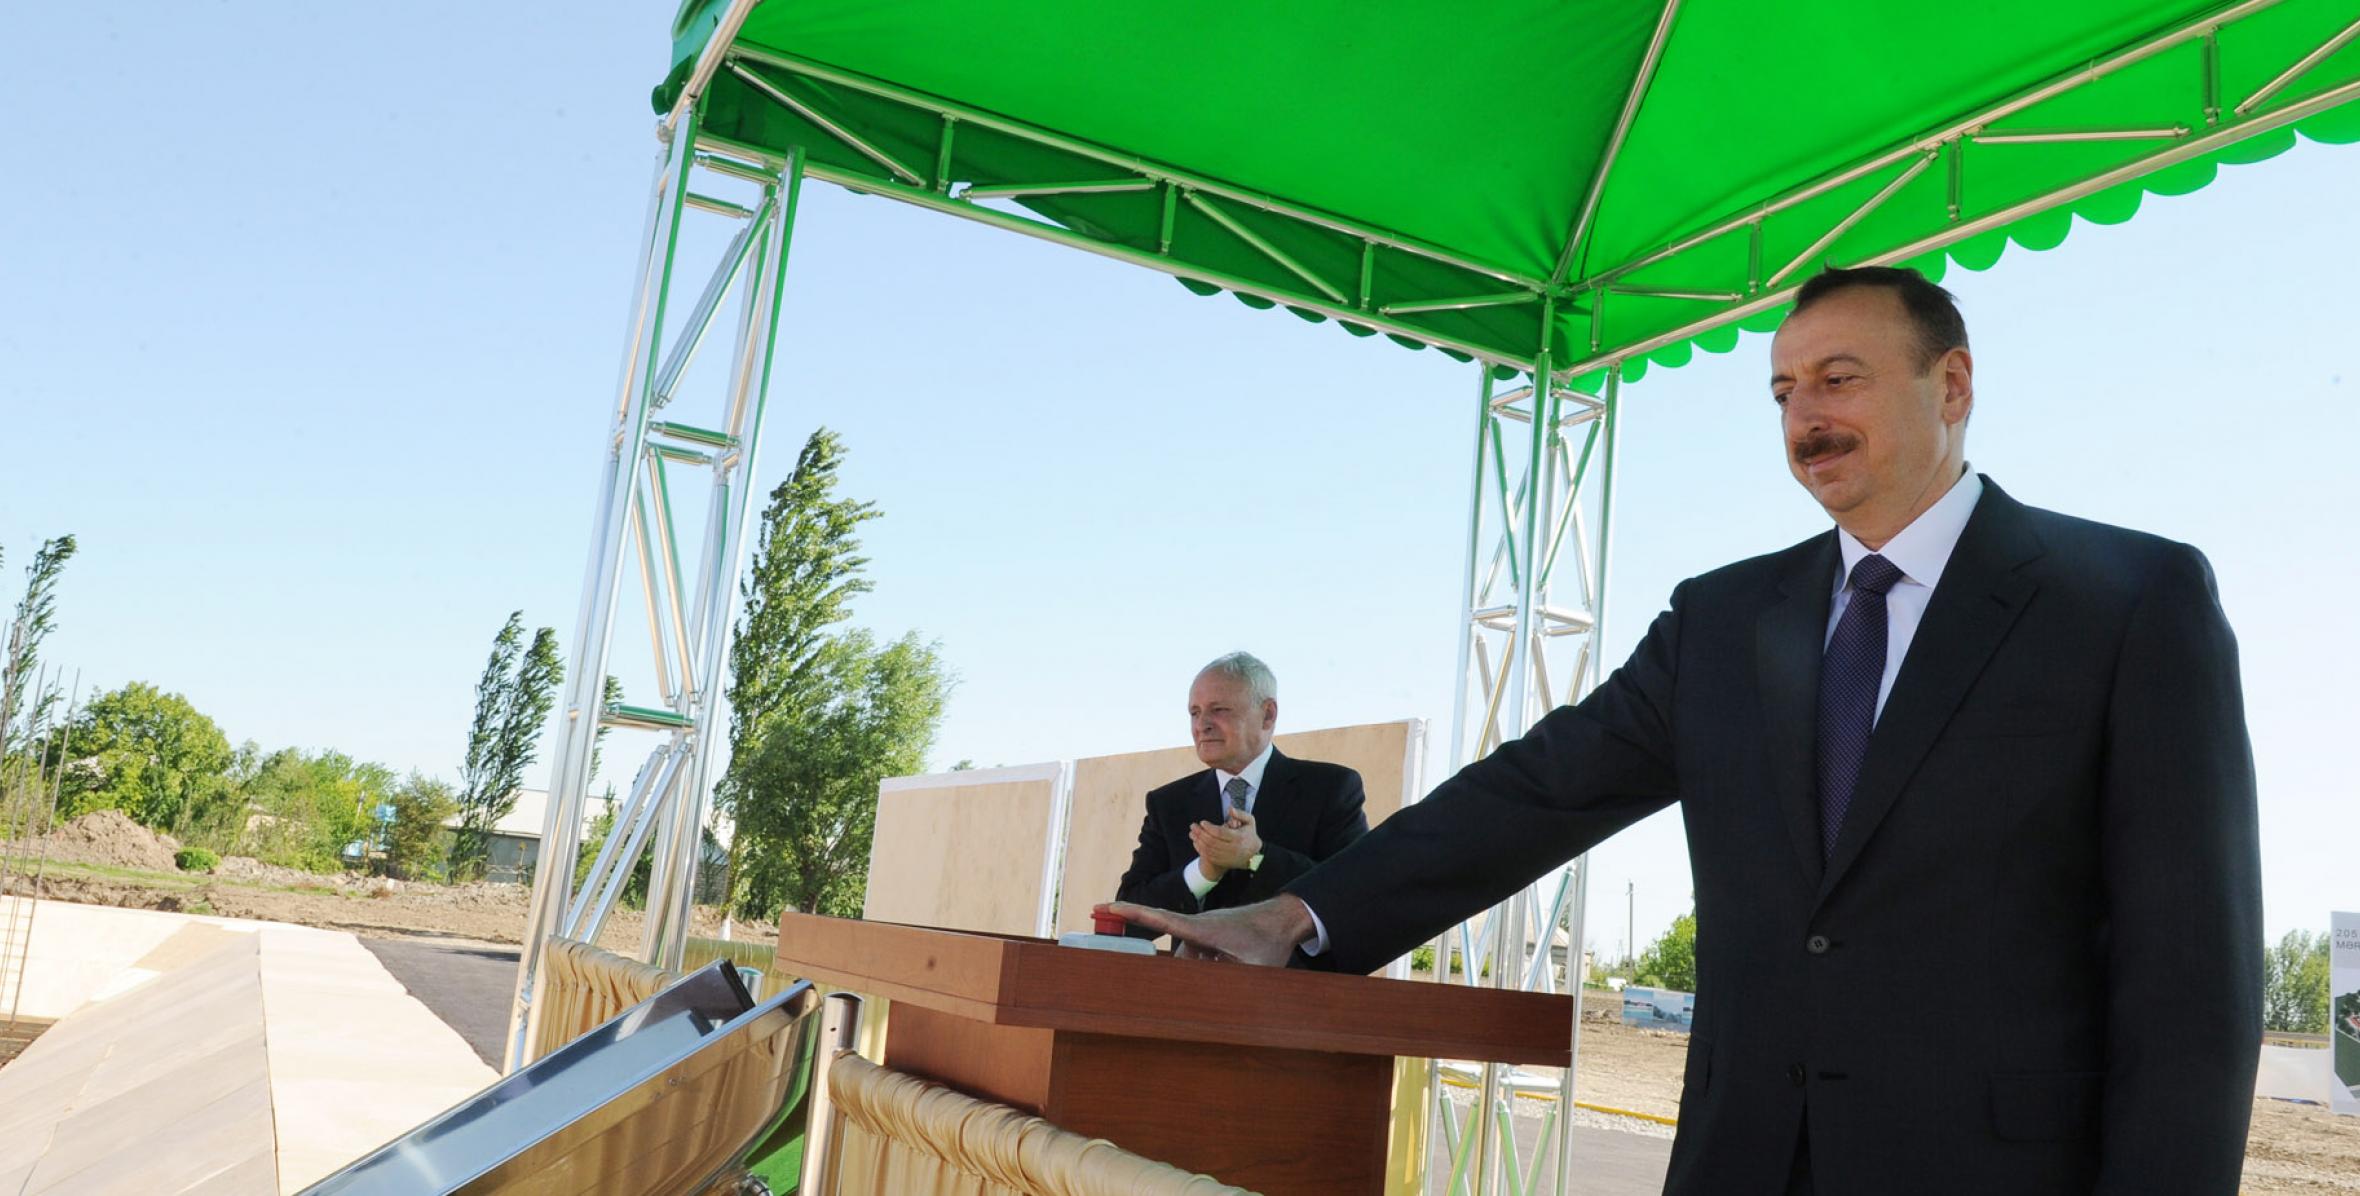 Ilham Aliyev took part at the ground breaking ceremony of Region’s Central Hospital in Agjabedi